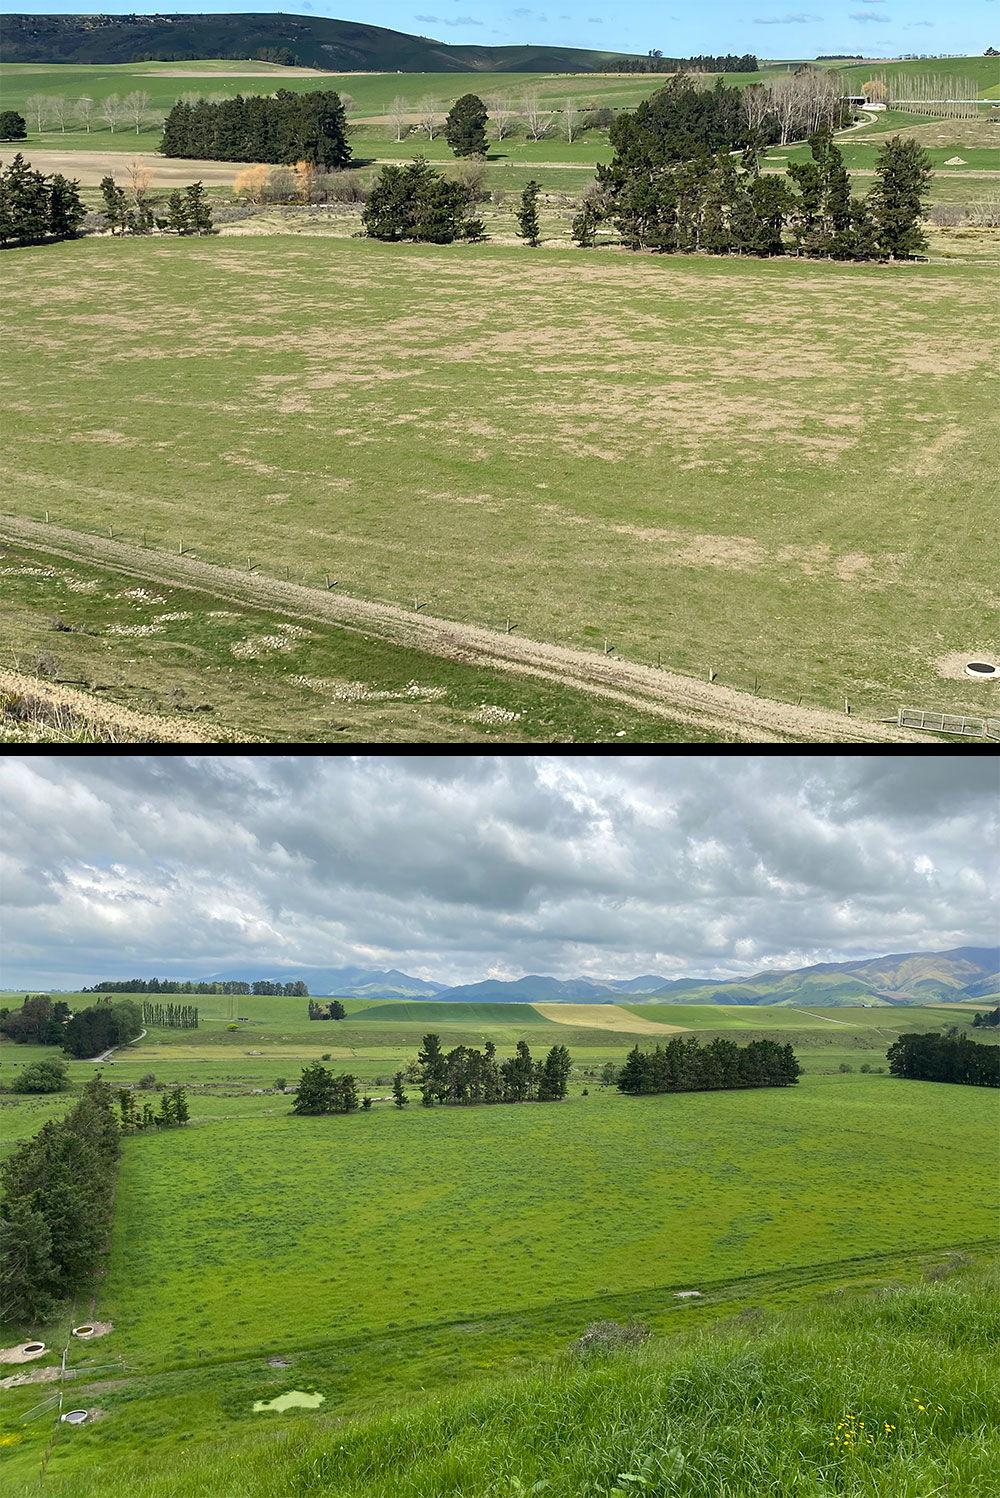 Measurable pasture improvement after grass grub damage with application of pest control product from BioActive Soils